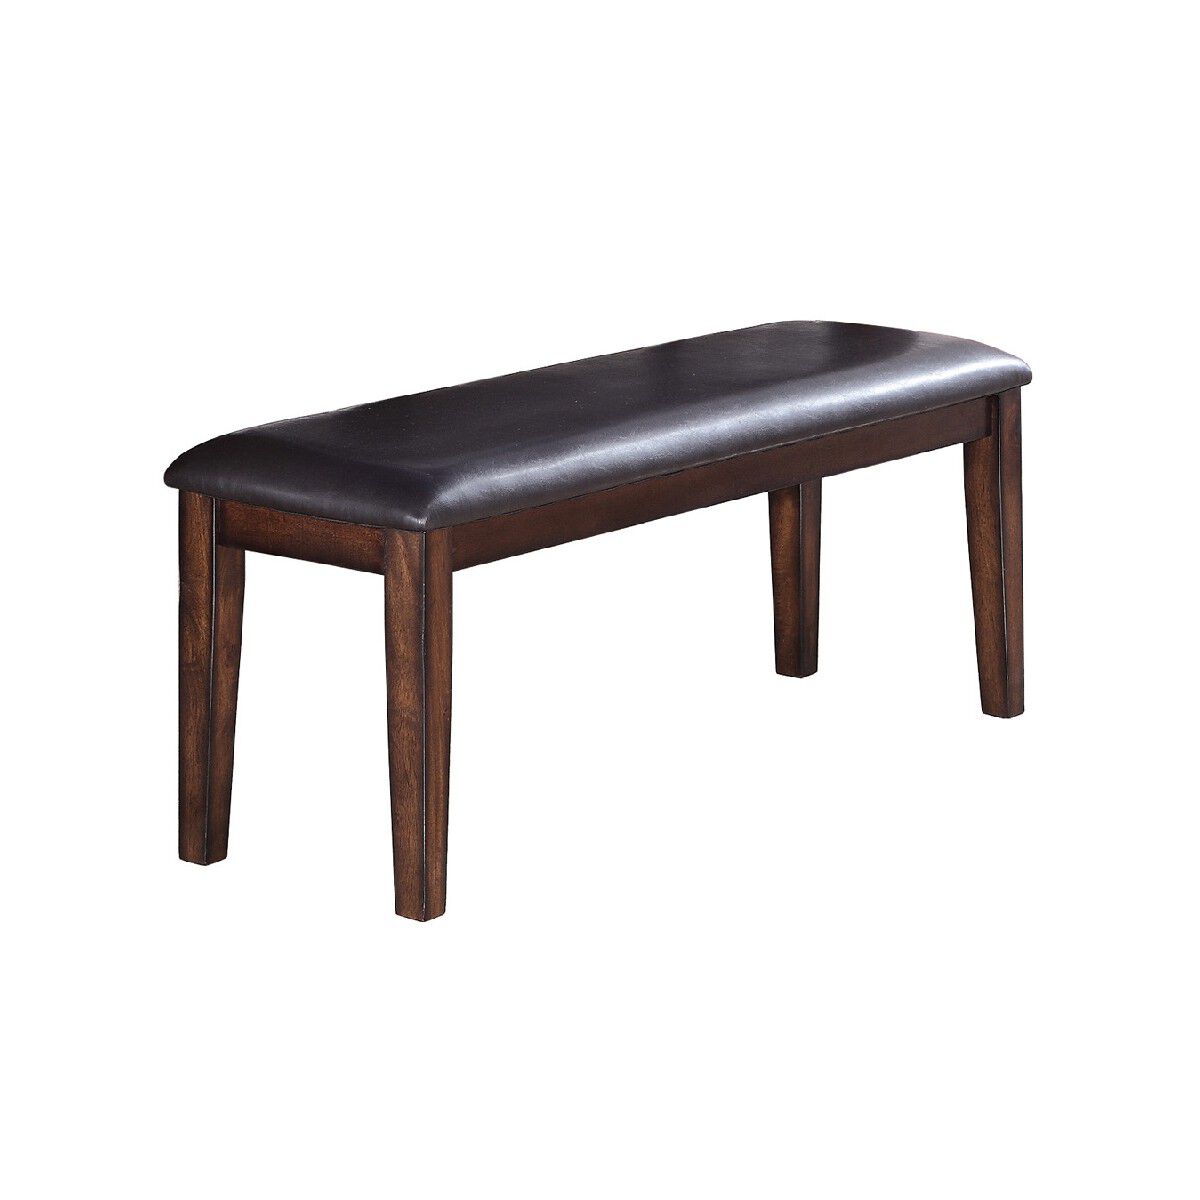 Rectangular Bench with Leatherette Seat and Chamfered Legs, Black and Brown - BM215442